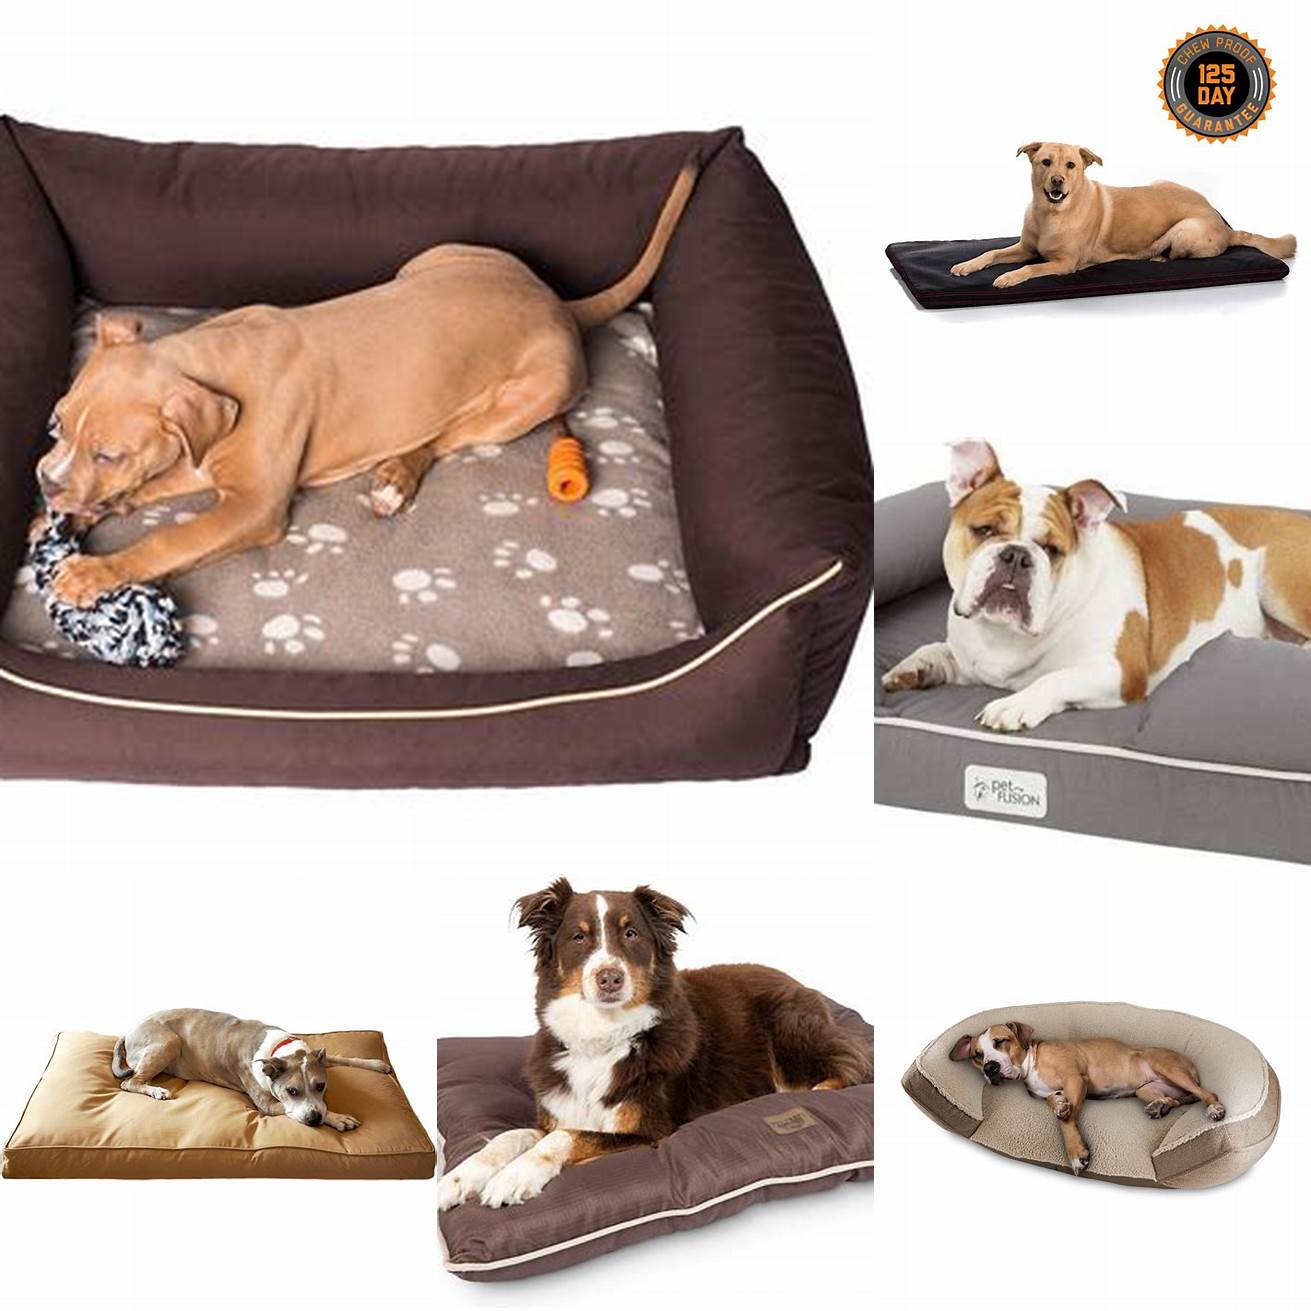 5 Best for Durability The KONG Chew-Resistant Dog Bed